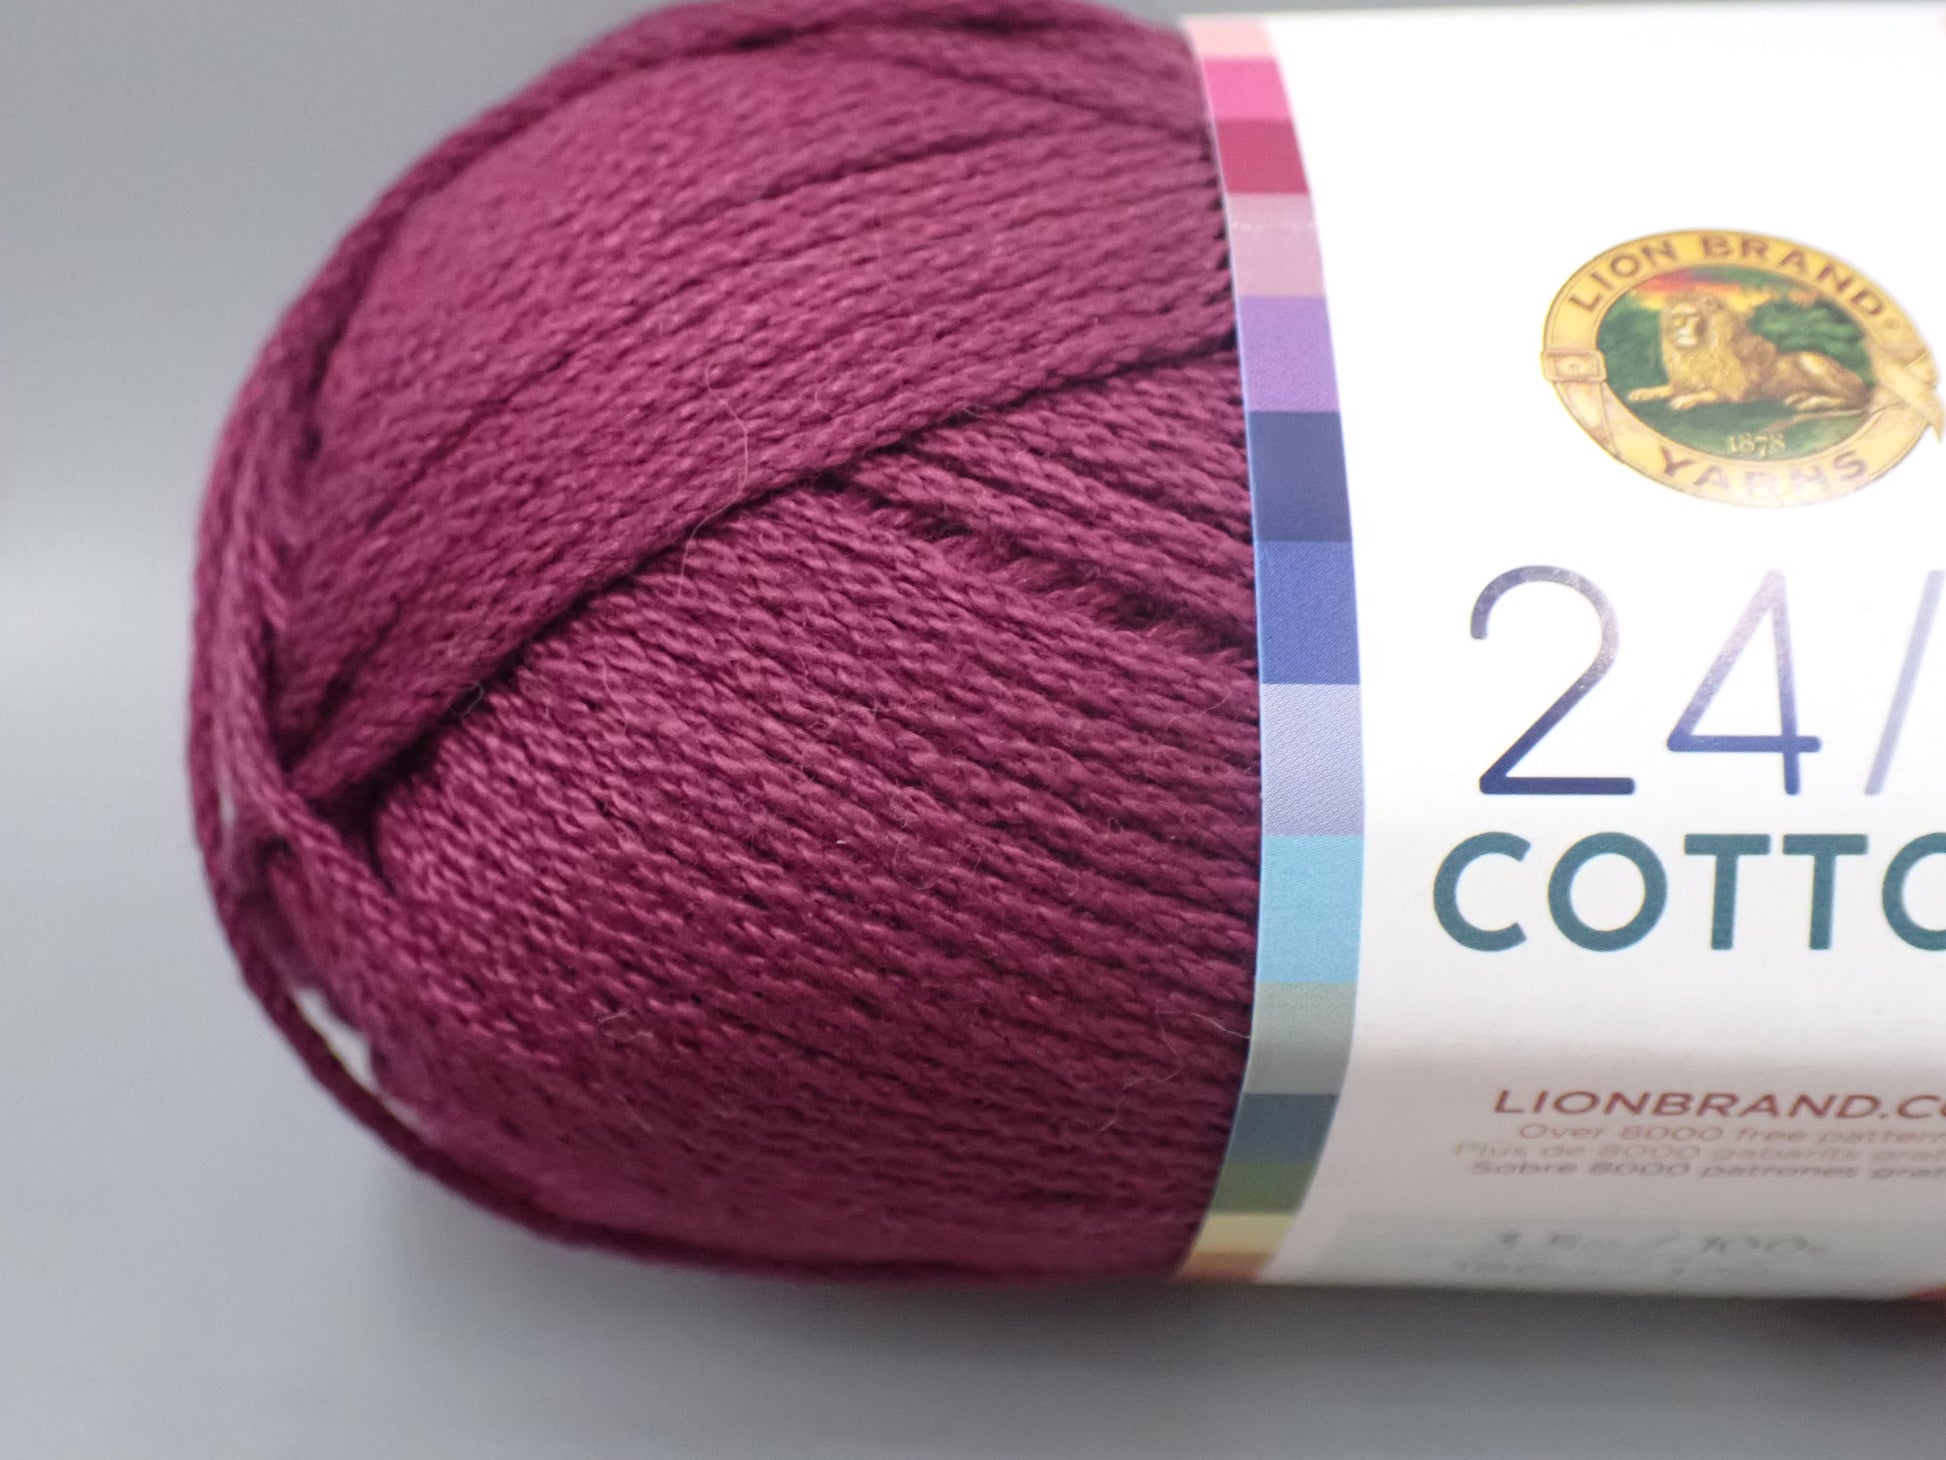 Lion Brand Yarns Worsted weight 24/7 Cotton Yarn Orchid